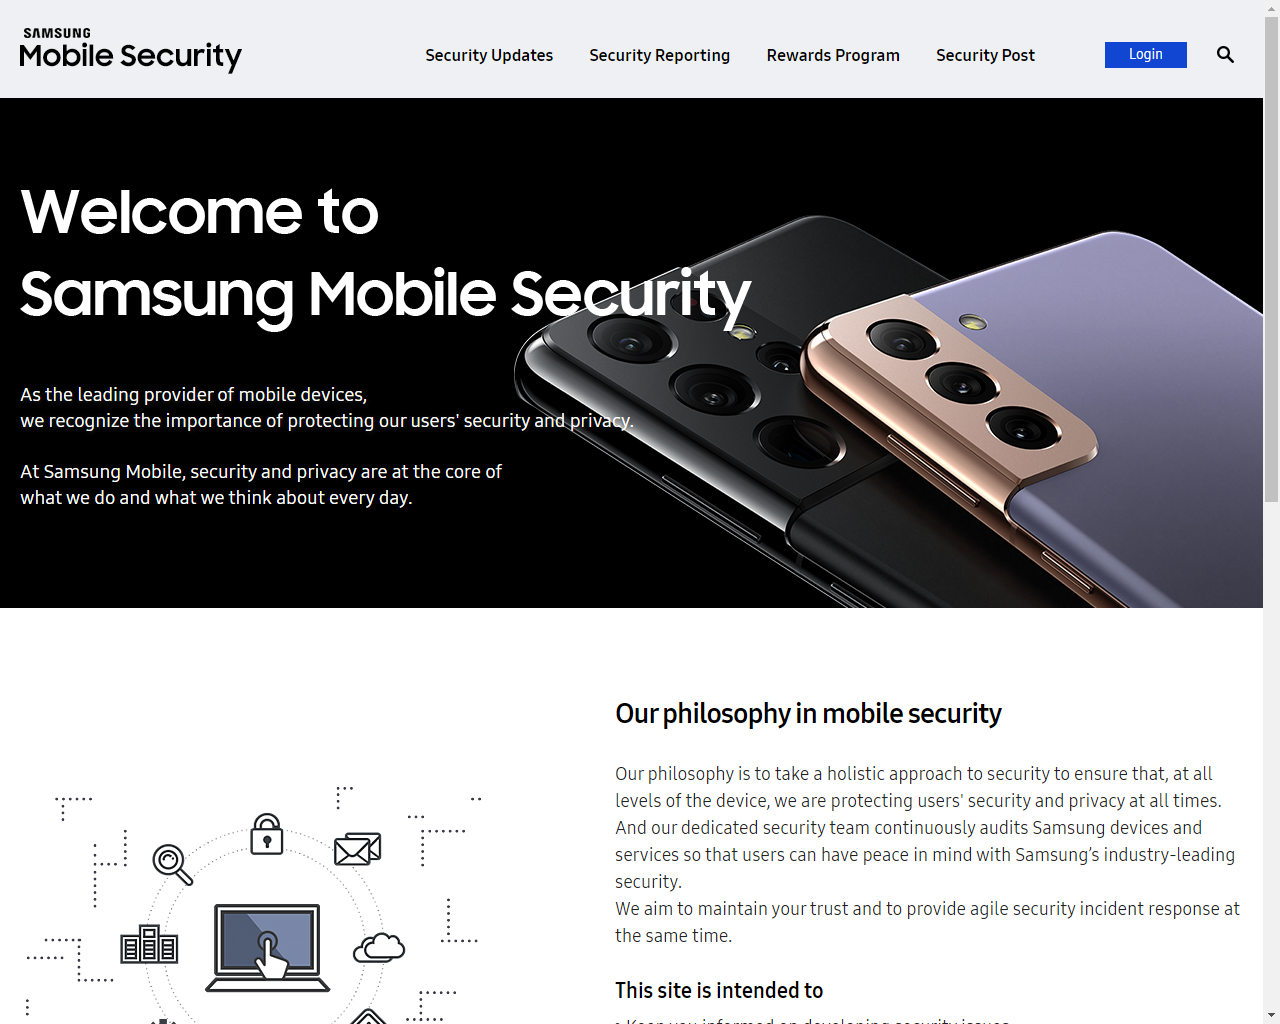 Samsung Mobile Security